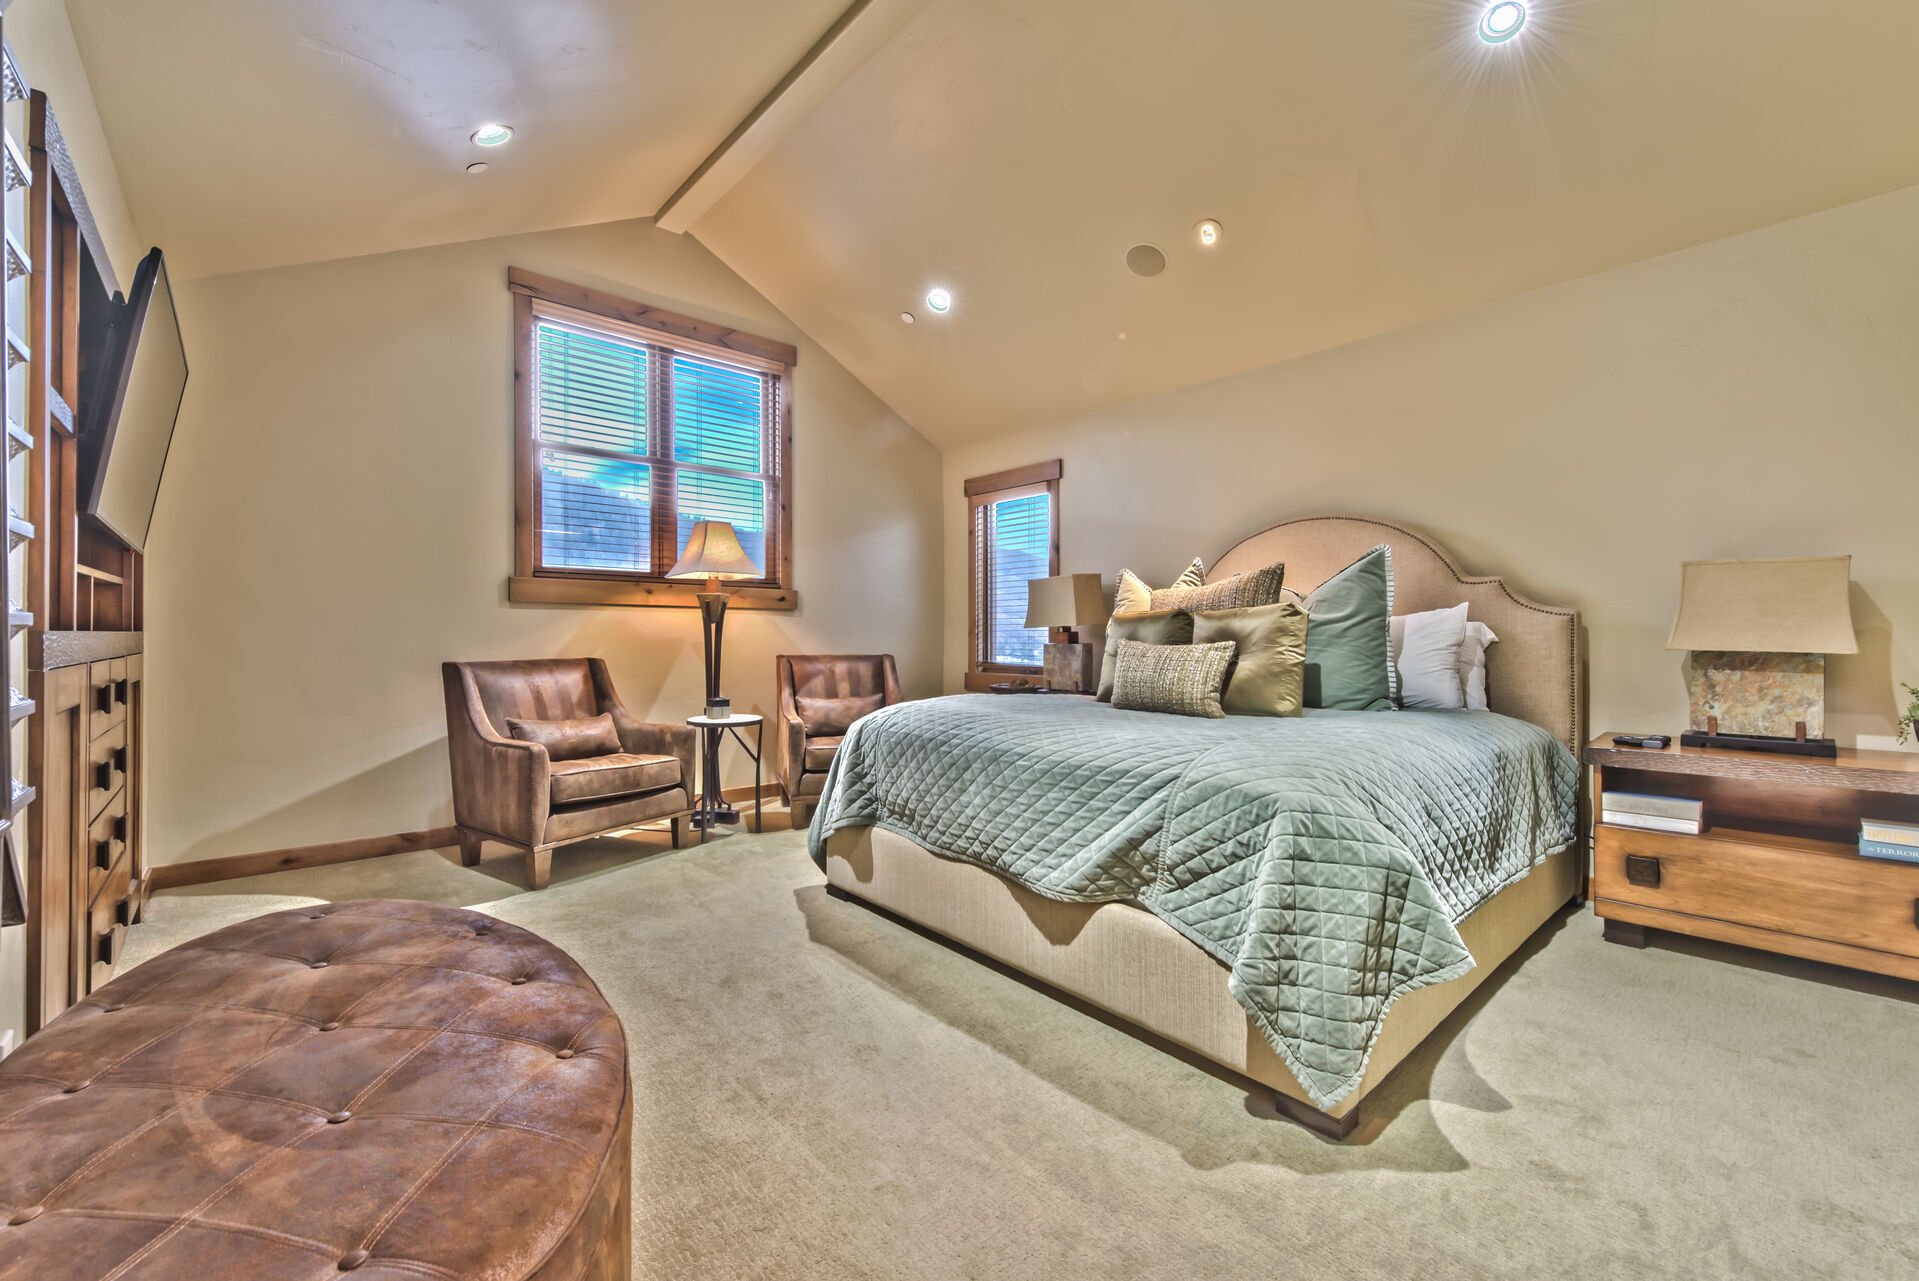 Grand Master Bedroom - Level 4 - ing Bed, TV, Private Bath and Deck